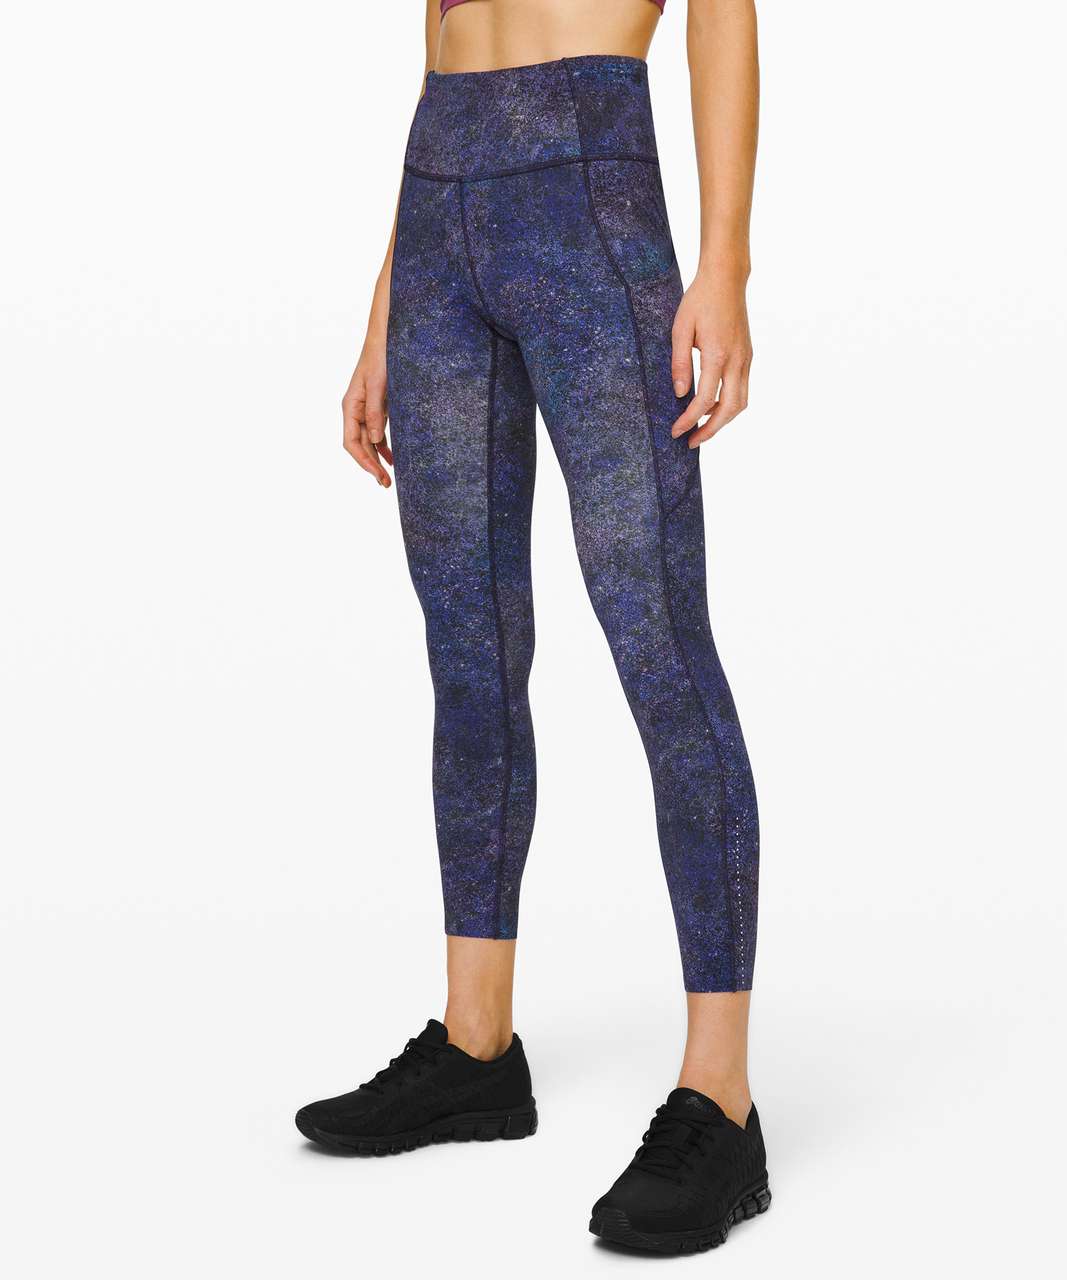 Lululemon Sheer Will HR Tight 28 *Pulse BLUE MESH Nulux NWT Size